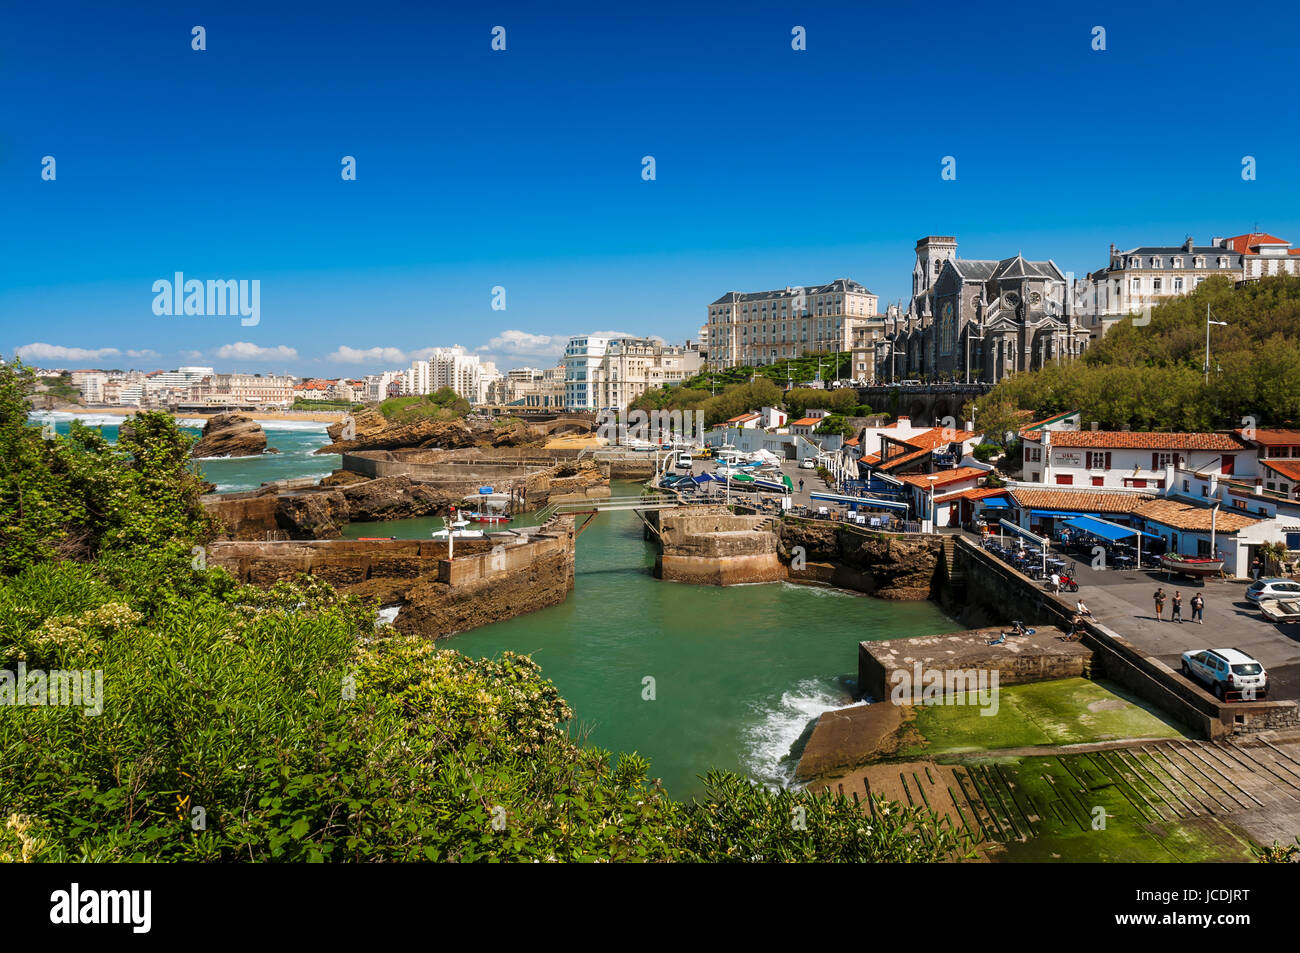 Church and arbor of Biarritz in France Stock Photo